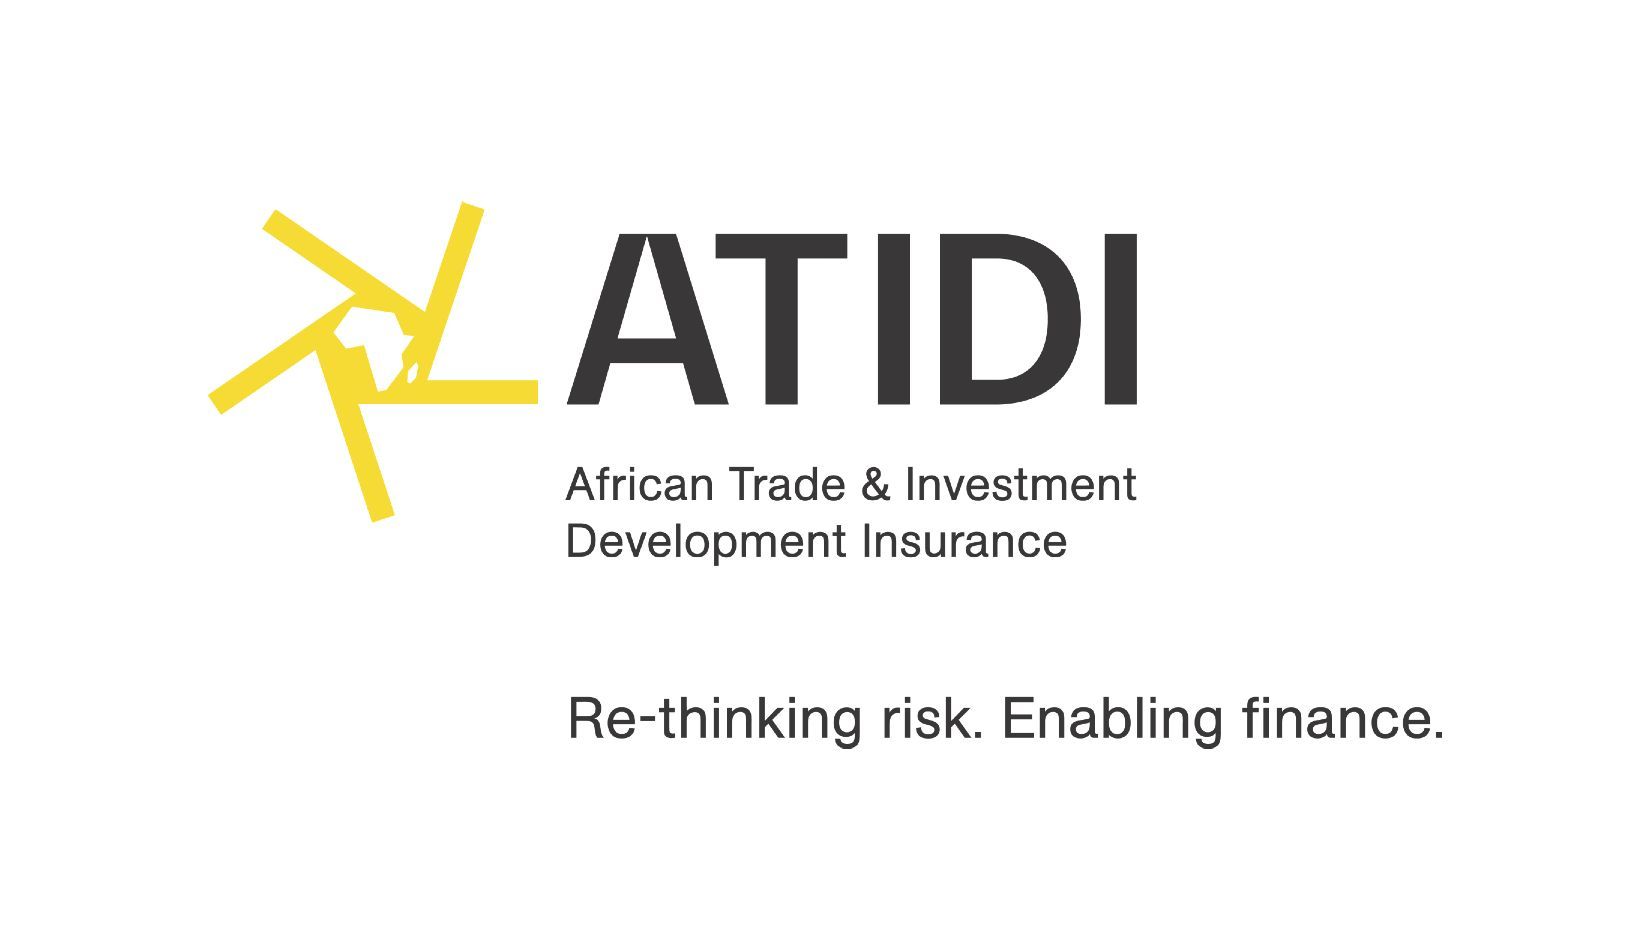 Pan-African Insurer Atidi's Net Profit Triples to Record $69M on New Business